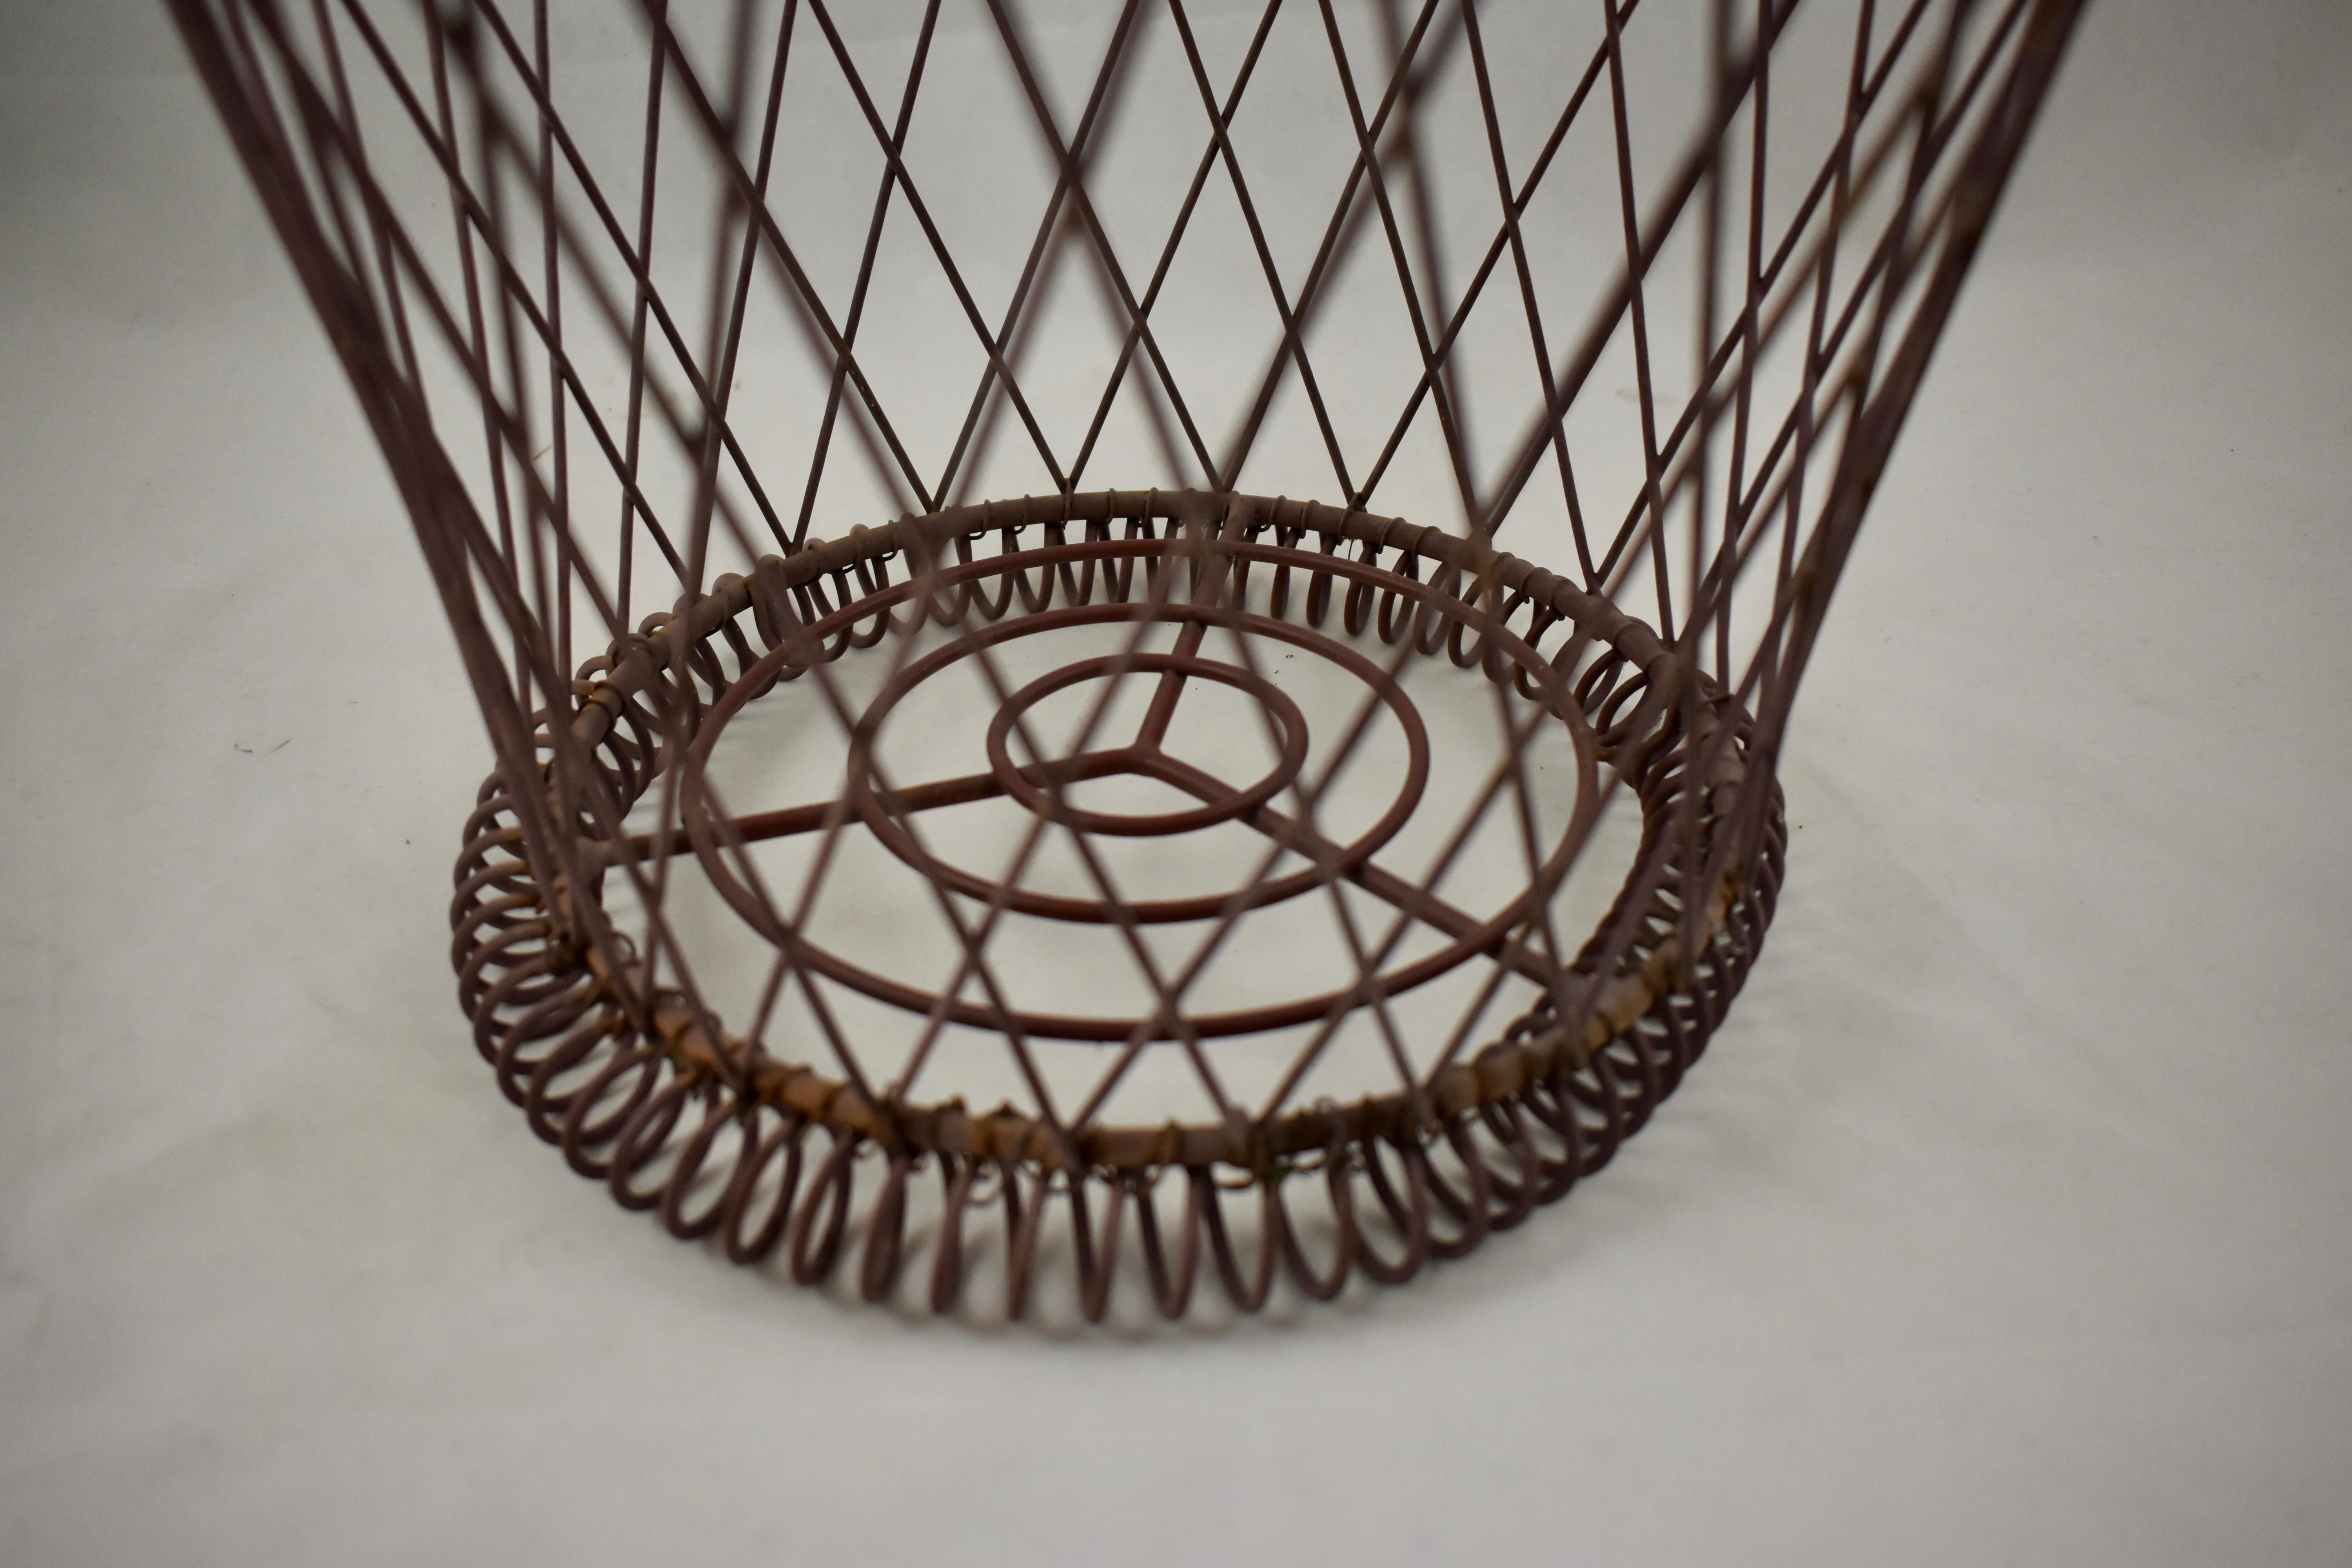 A round wire basket, late 19th century, France.
 
Hand-formed with open work metal woven with a scrolled bottom, this type of basket works beautifully for holding a large terra cotta flower pot or as a waste basket in a bath or bedroom. With the